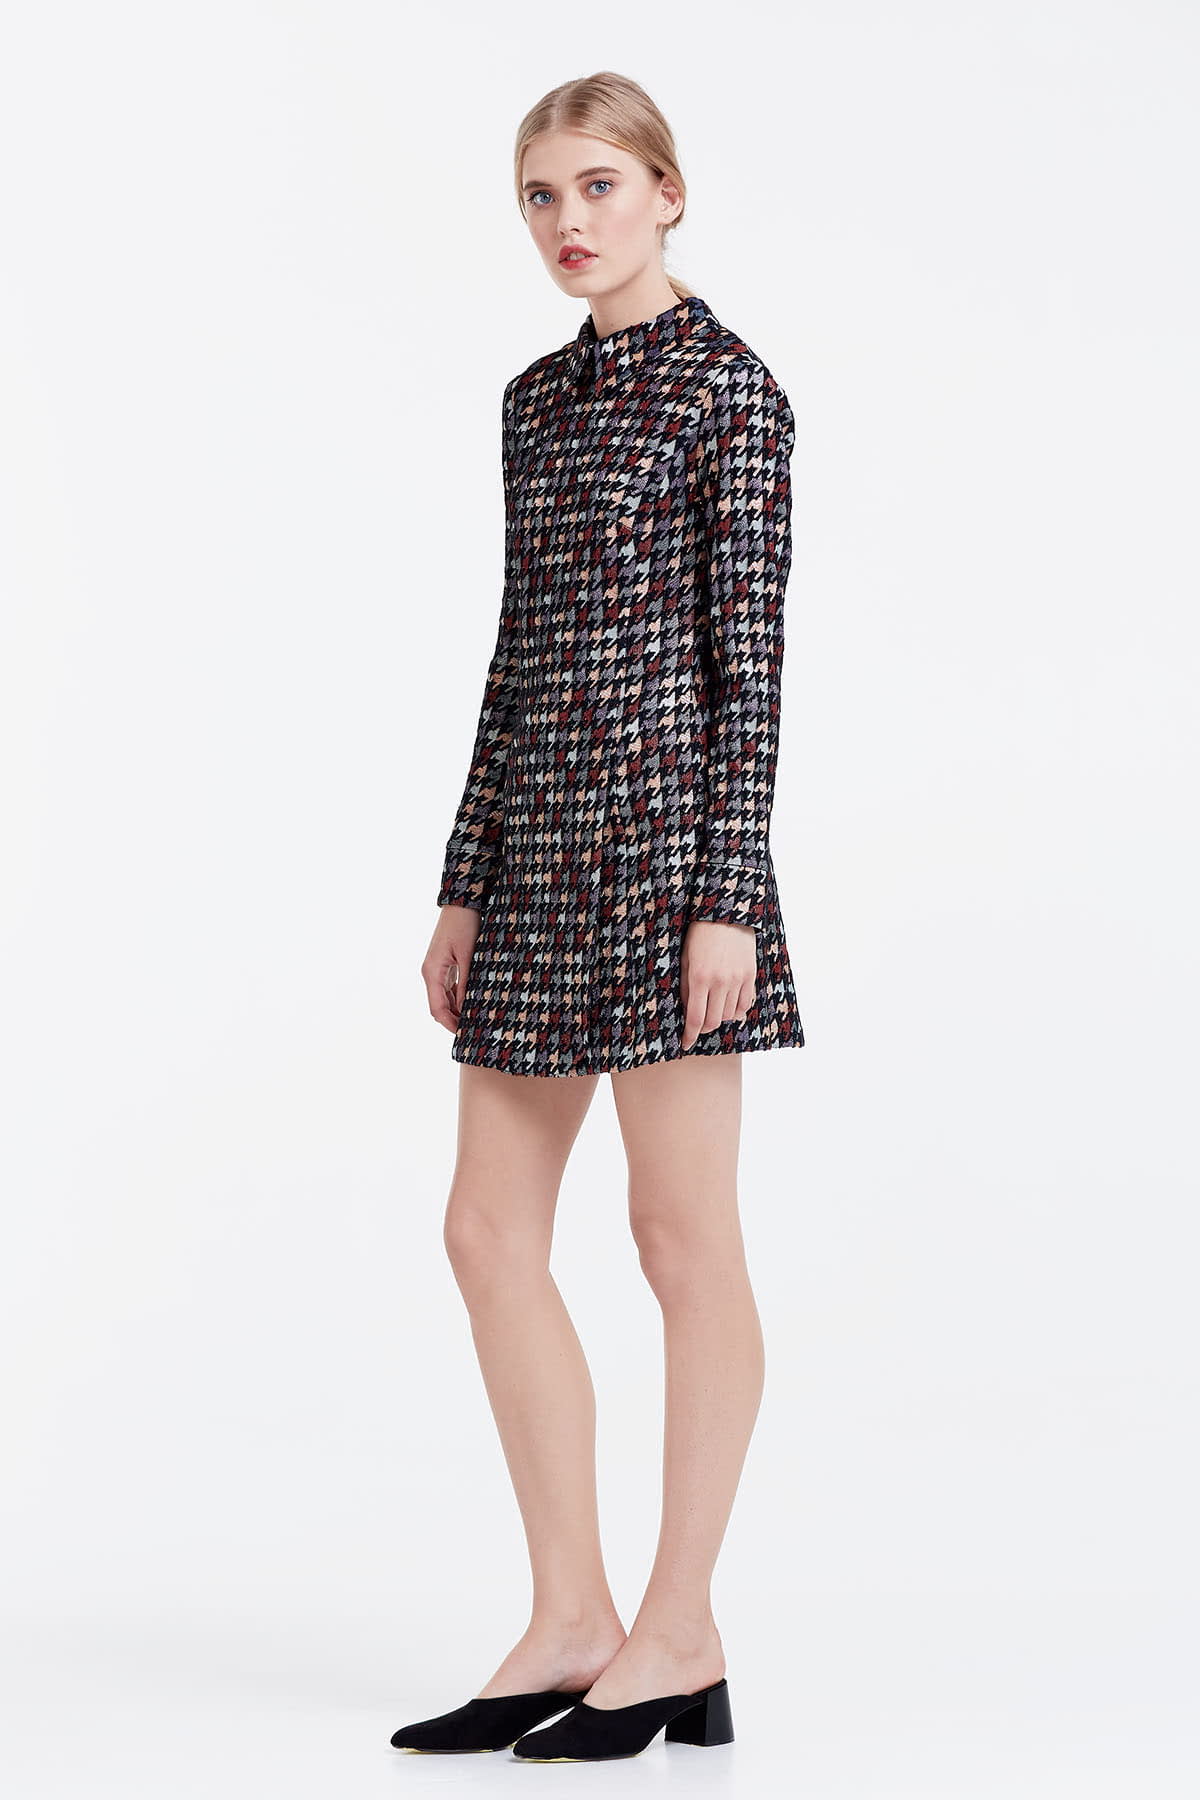 Mini dress with a houndstooth print and a collar, photo 3